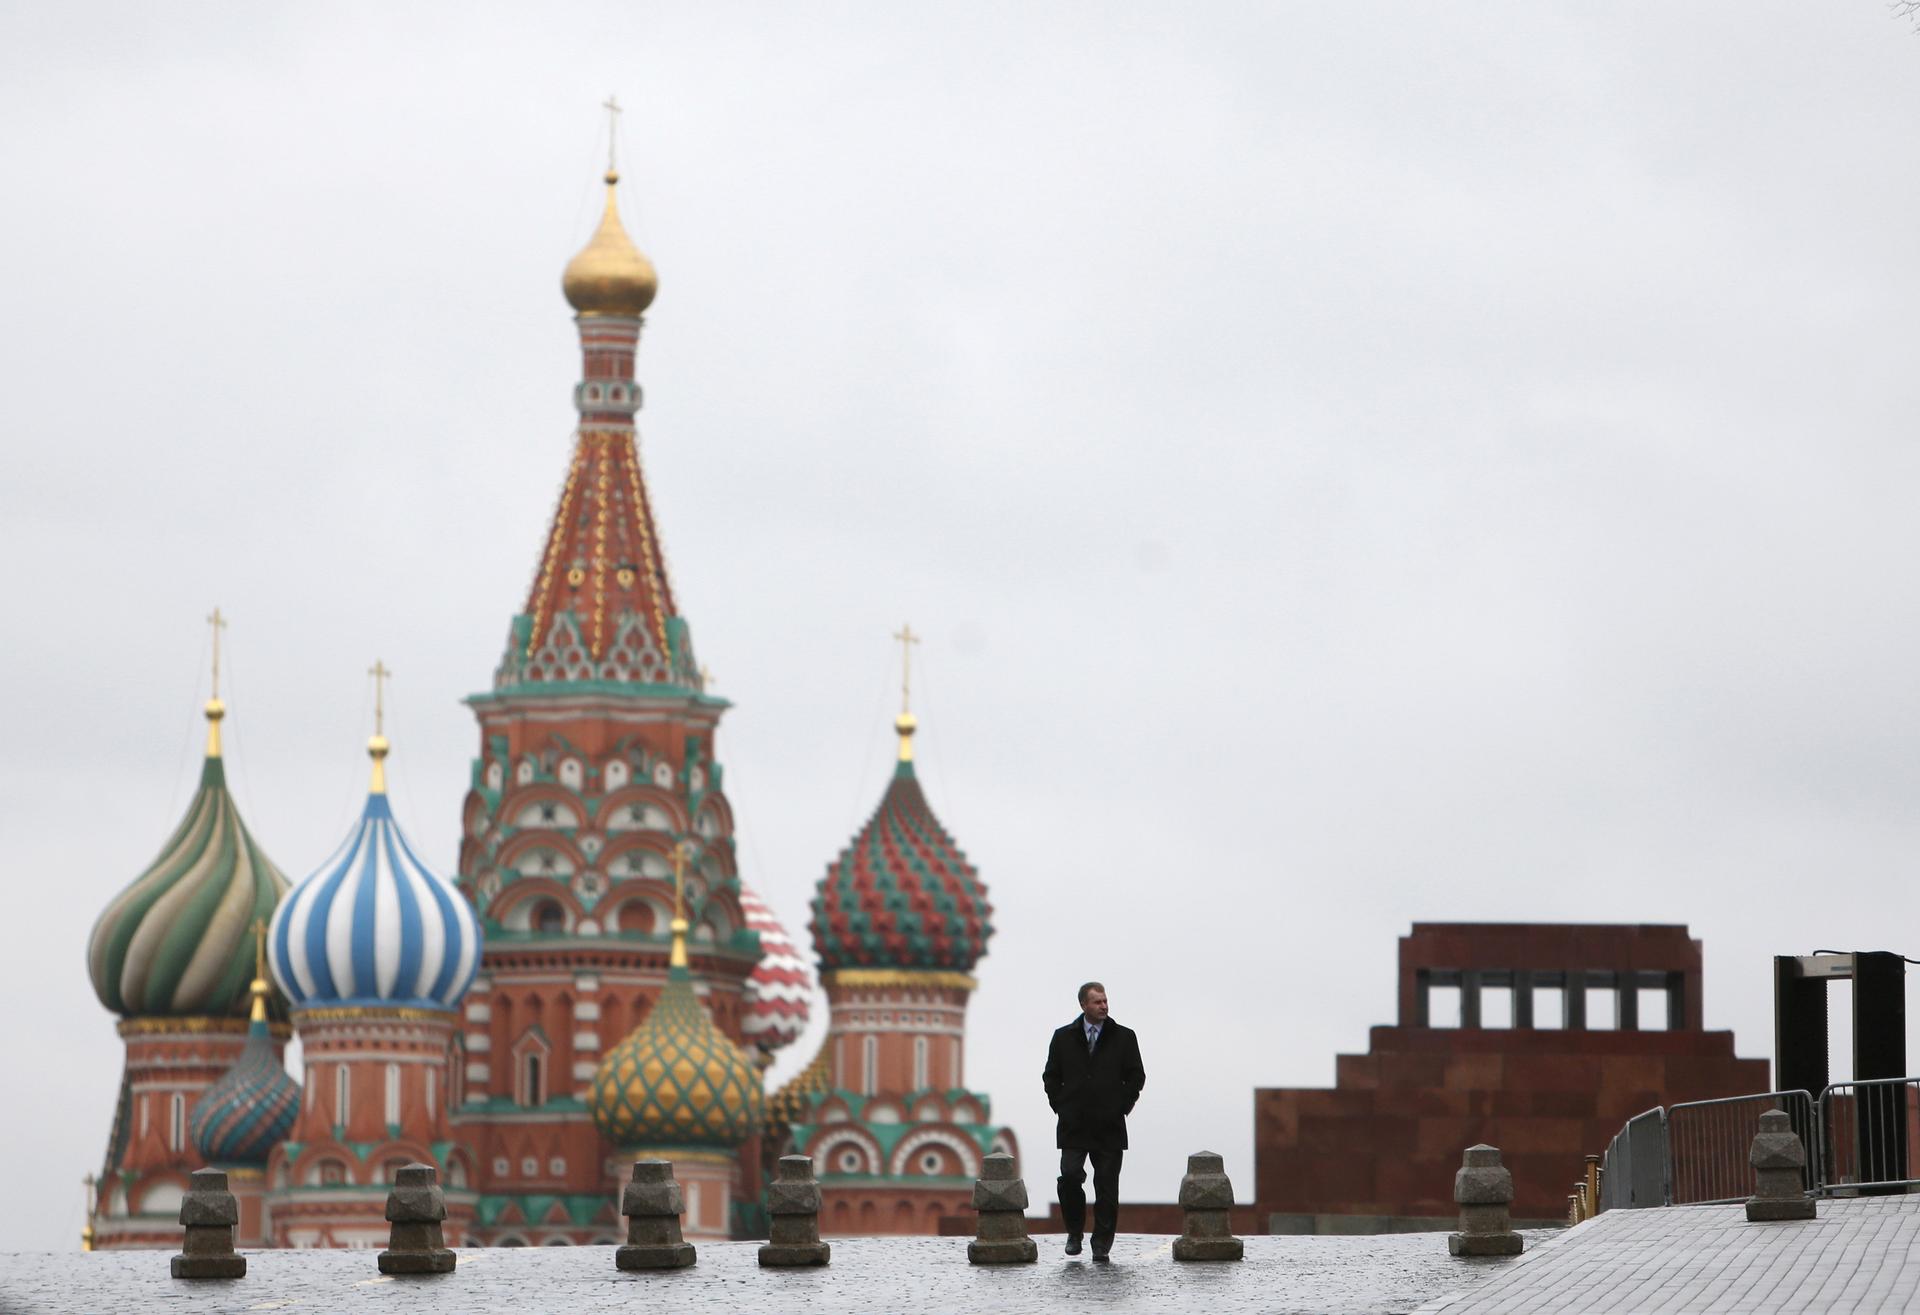 A man walks along Red Square, with the mausoleum of Vladimir Lenin and St. Basil's Cathedral in the background, in central Moscow, Russia.